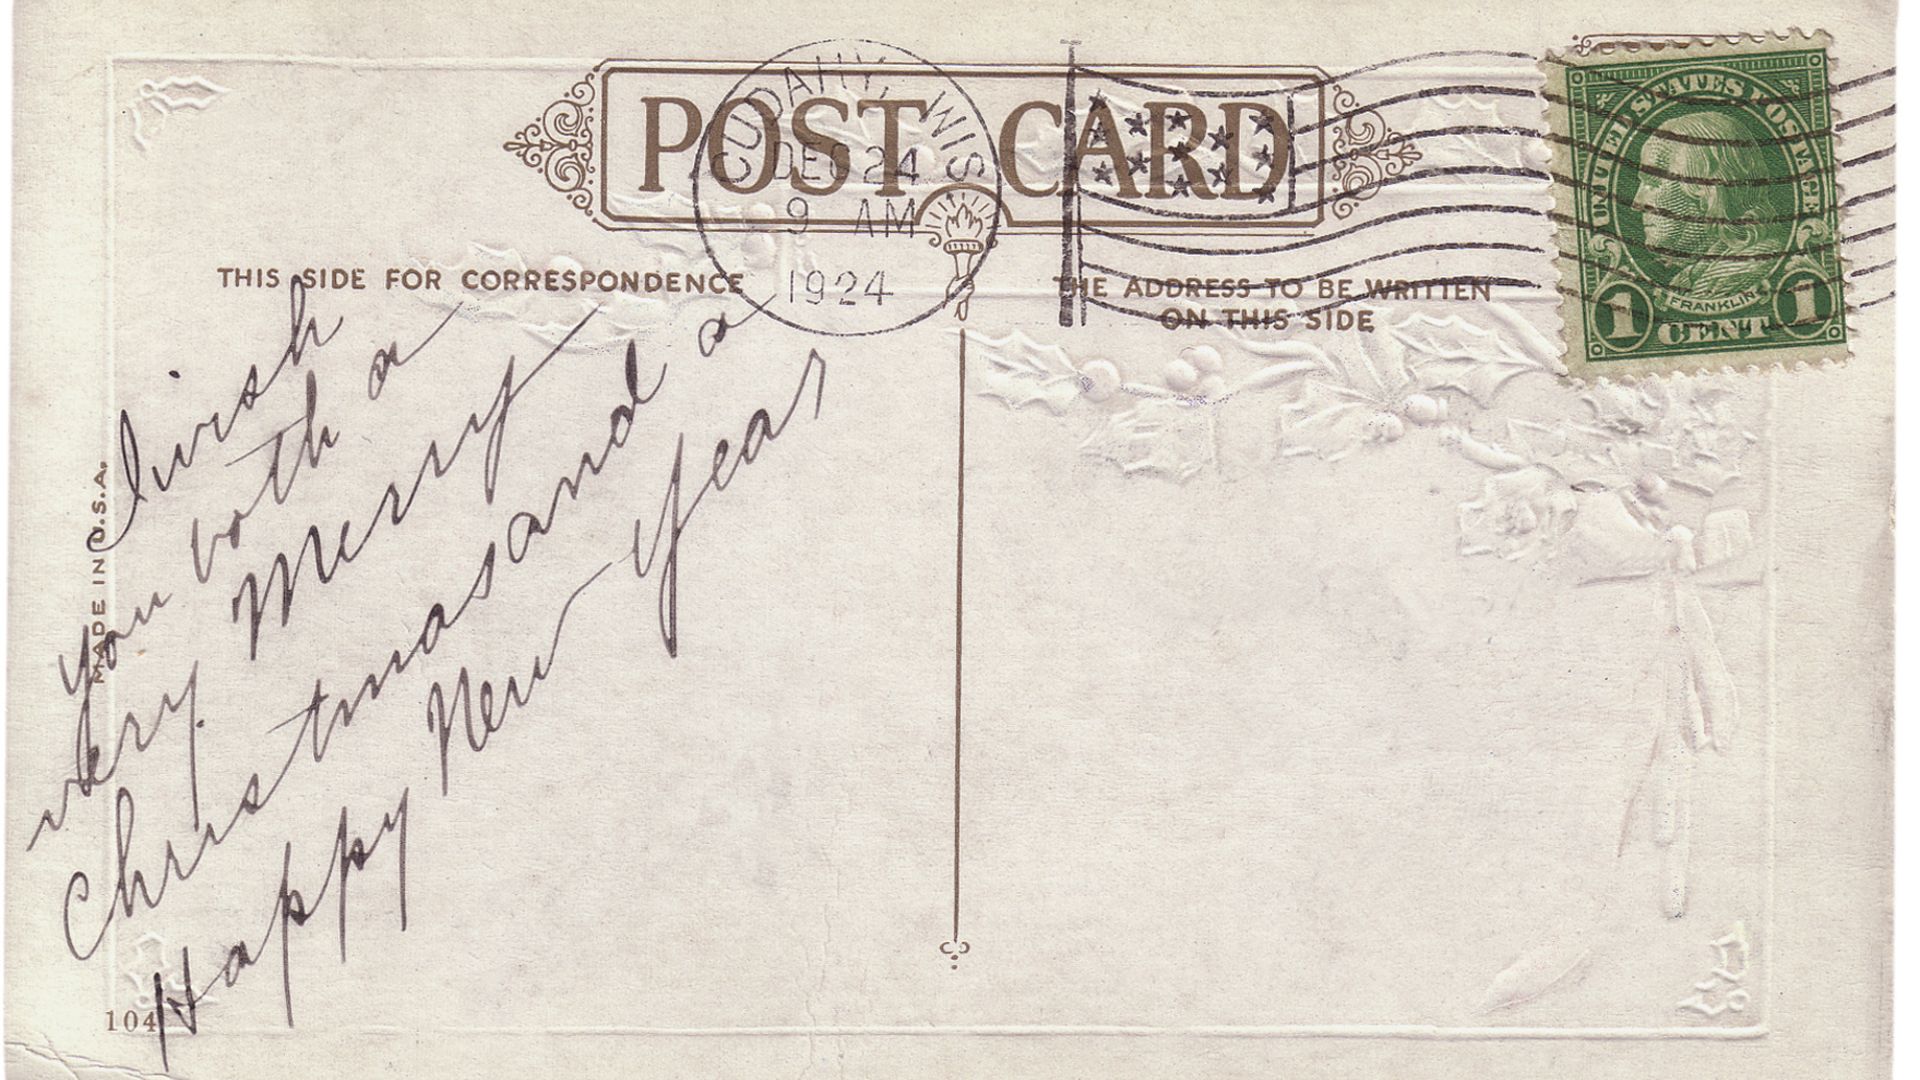 Postcard with writing on it.